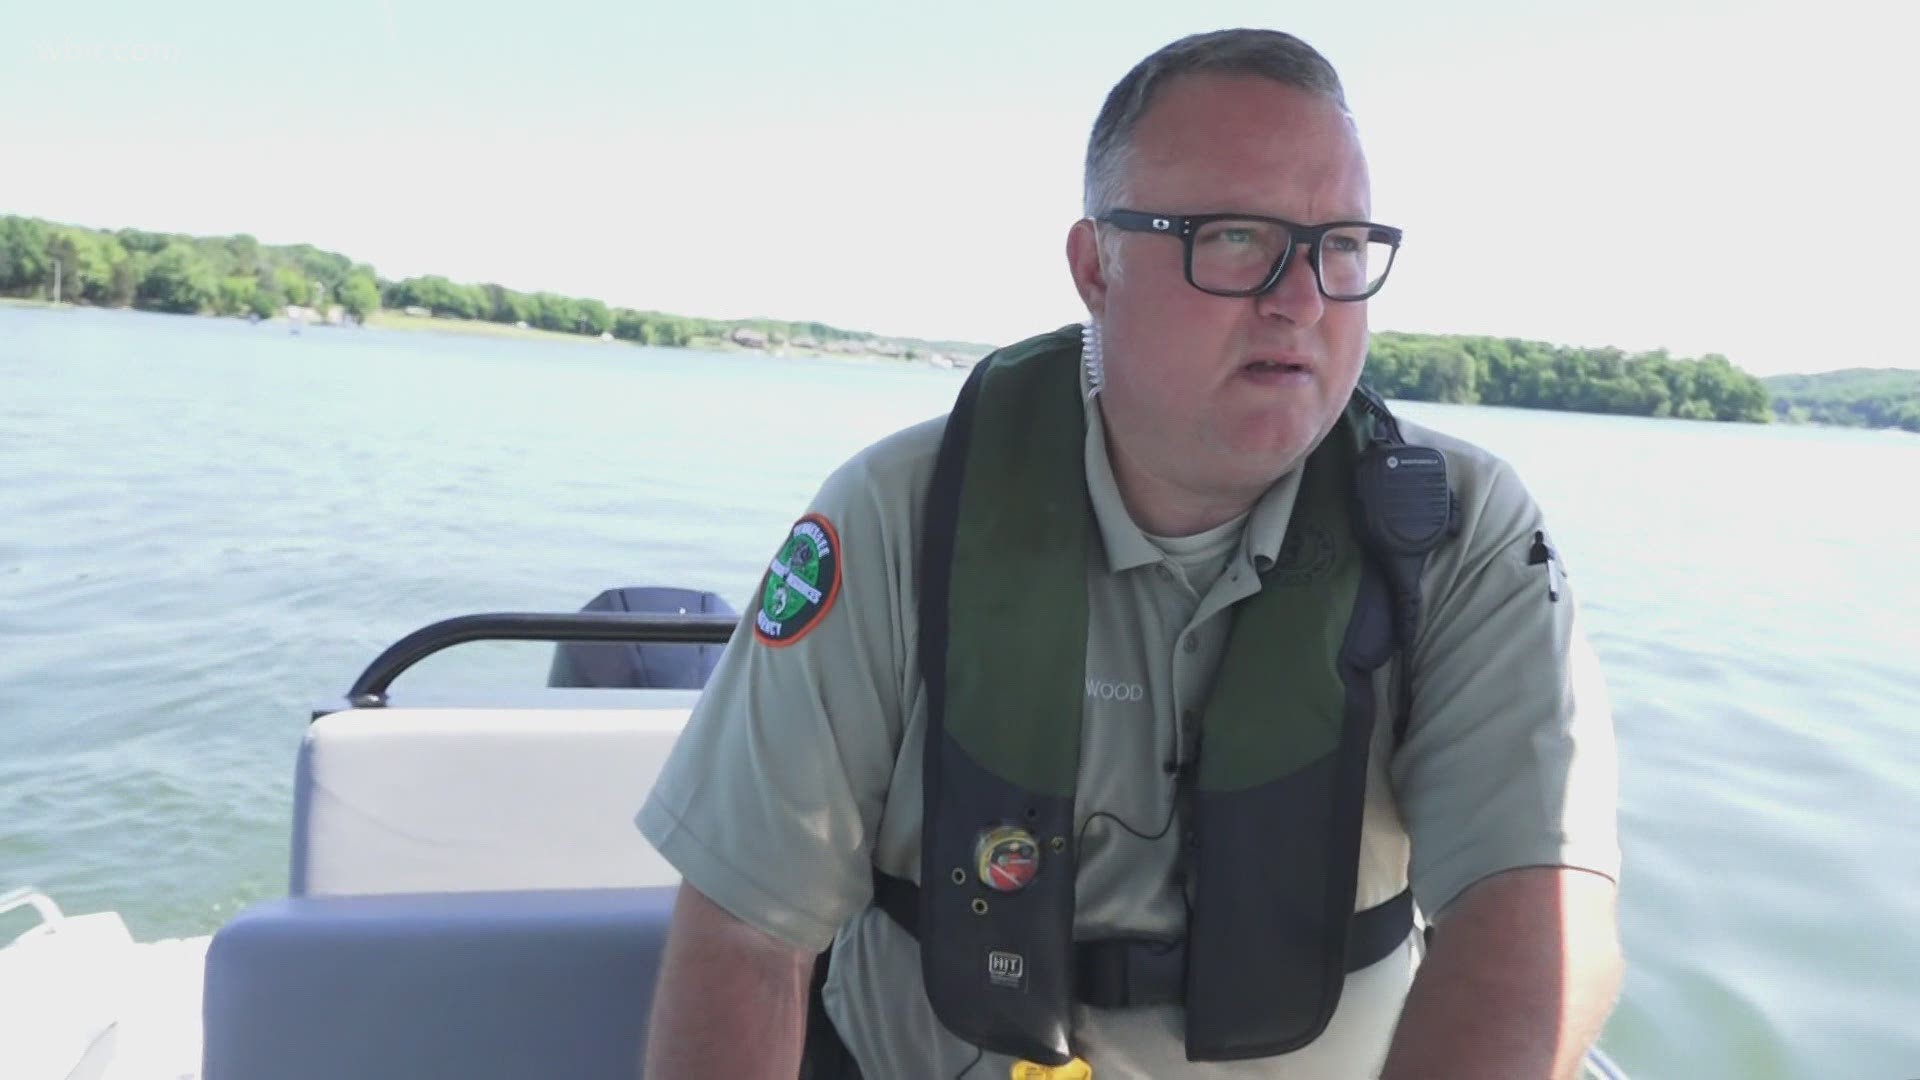 After a record-low number of deaths in 2019, 2020 recorded the most boating fatalities in four decades, TWRA said.